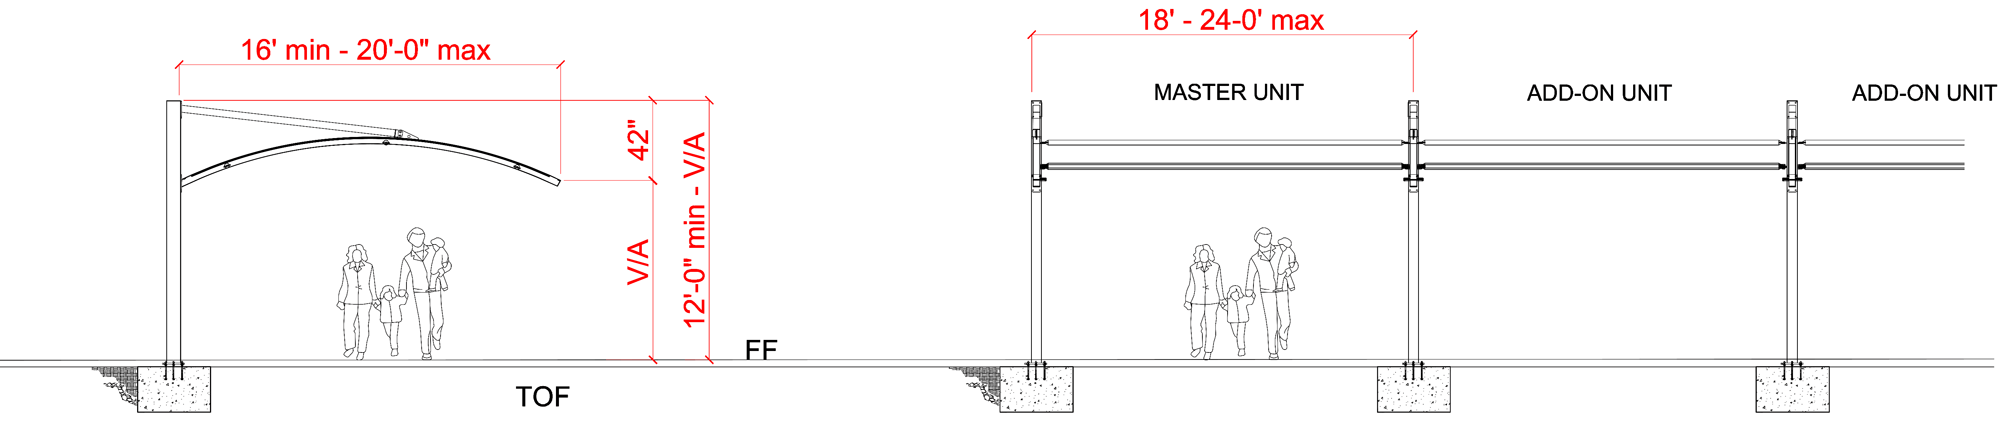 height of shade structure - layout plan